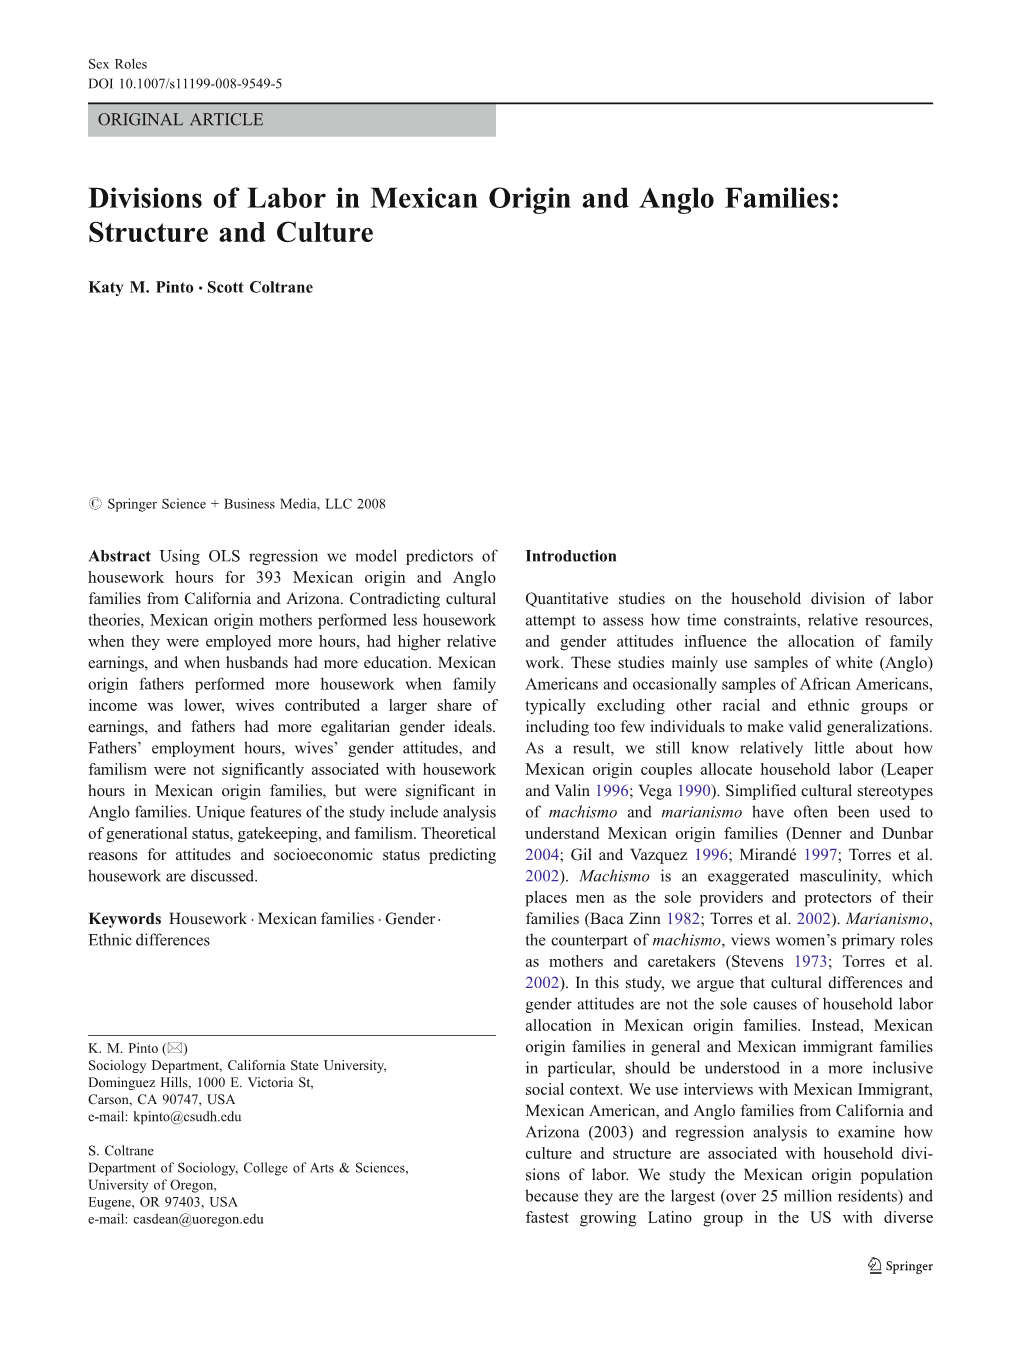 Divisions of Labor in Mexican Origin and Anglo Families: Structure and Culture